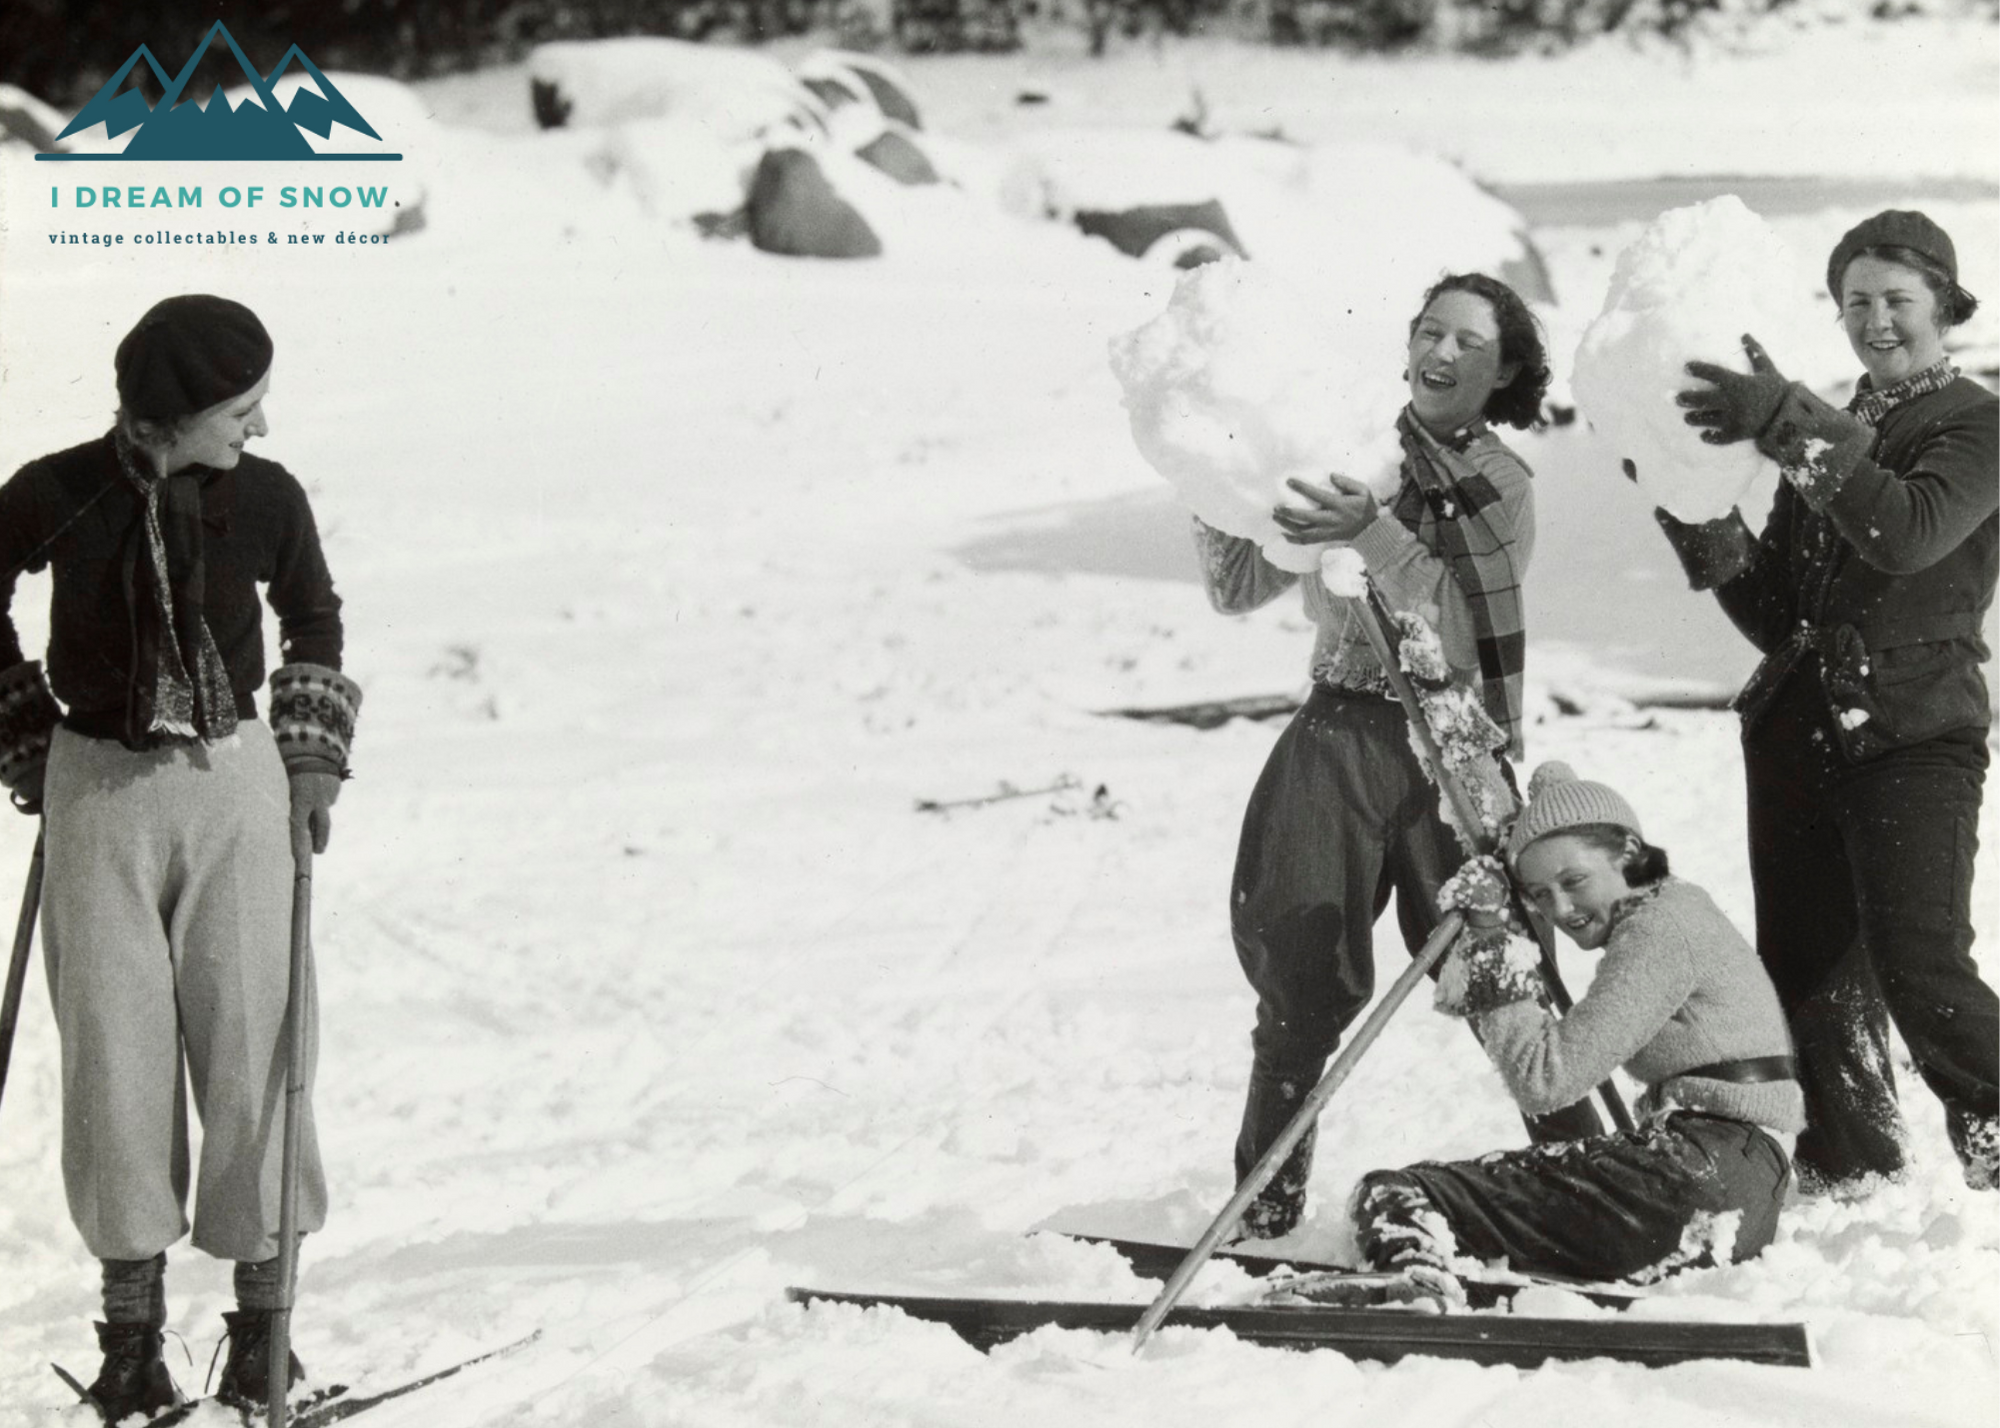 Women on Skis at Mt Buffalo, 2 with very large snowballs in their arms as if to throw them.